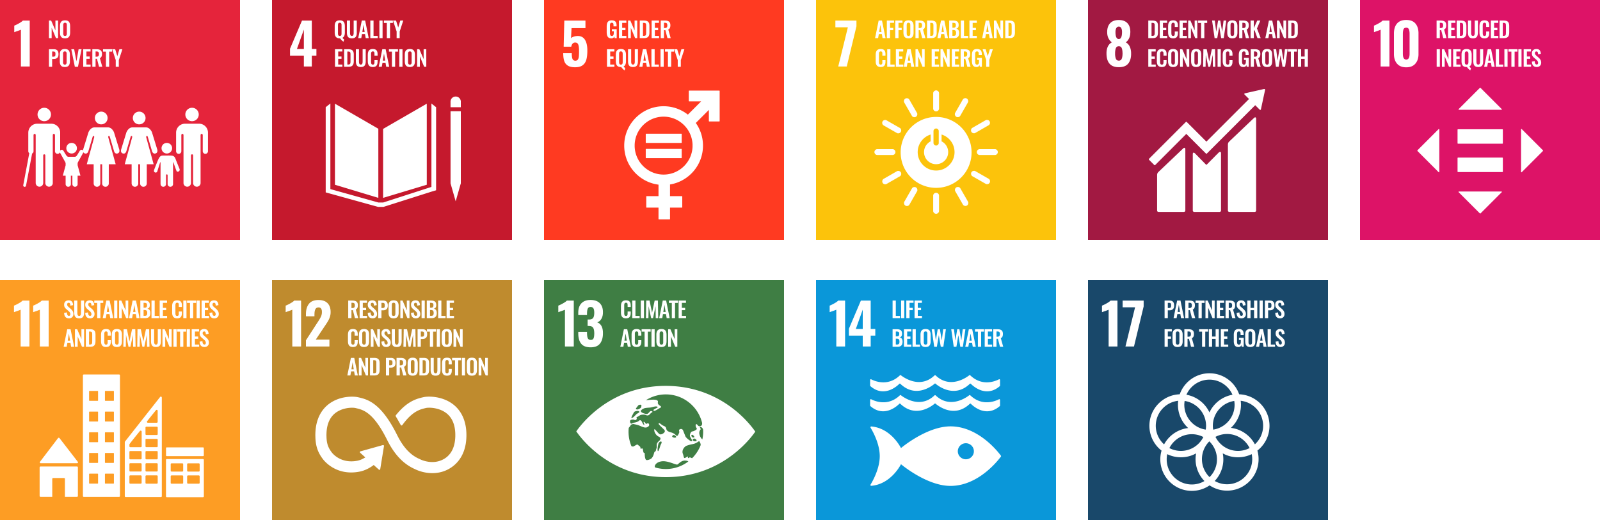 1 No Poverty 4 Quality Education 5 Gender Equality 7 Affordable and Clean Energy 8 Decent Work and Economic Growth 10 Reduced Inequalities 11 Sustainable Cities and Communities 12 Responsible Consumption and Production 13 Climate Action 14 Life Below Water 17 Partnerships for the Goals